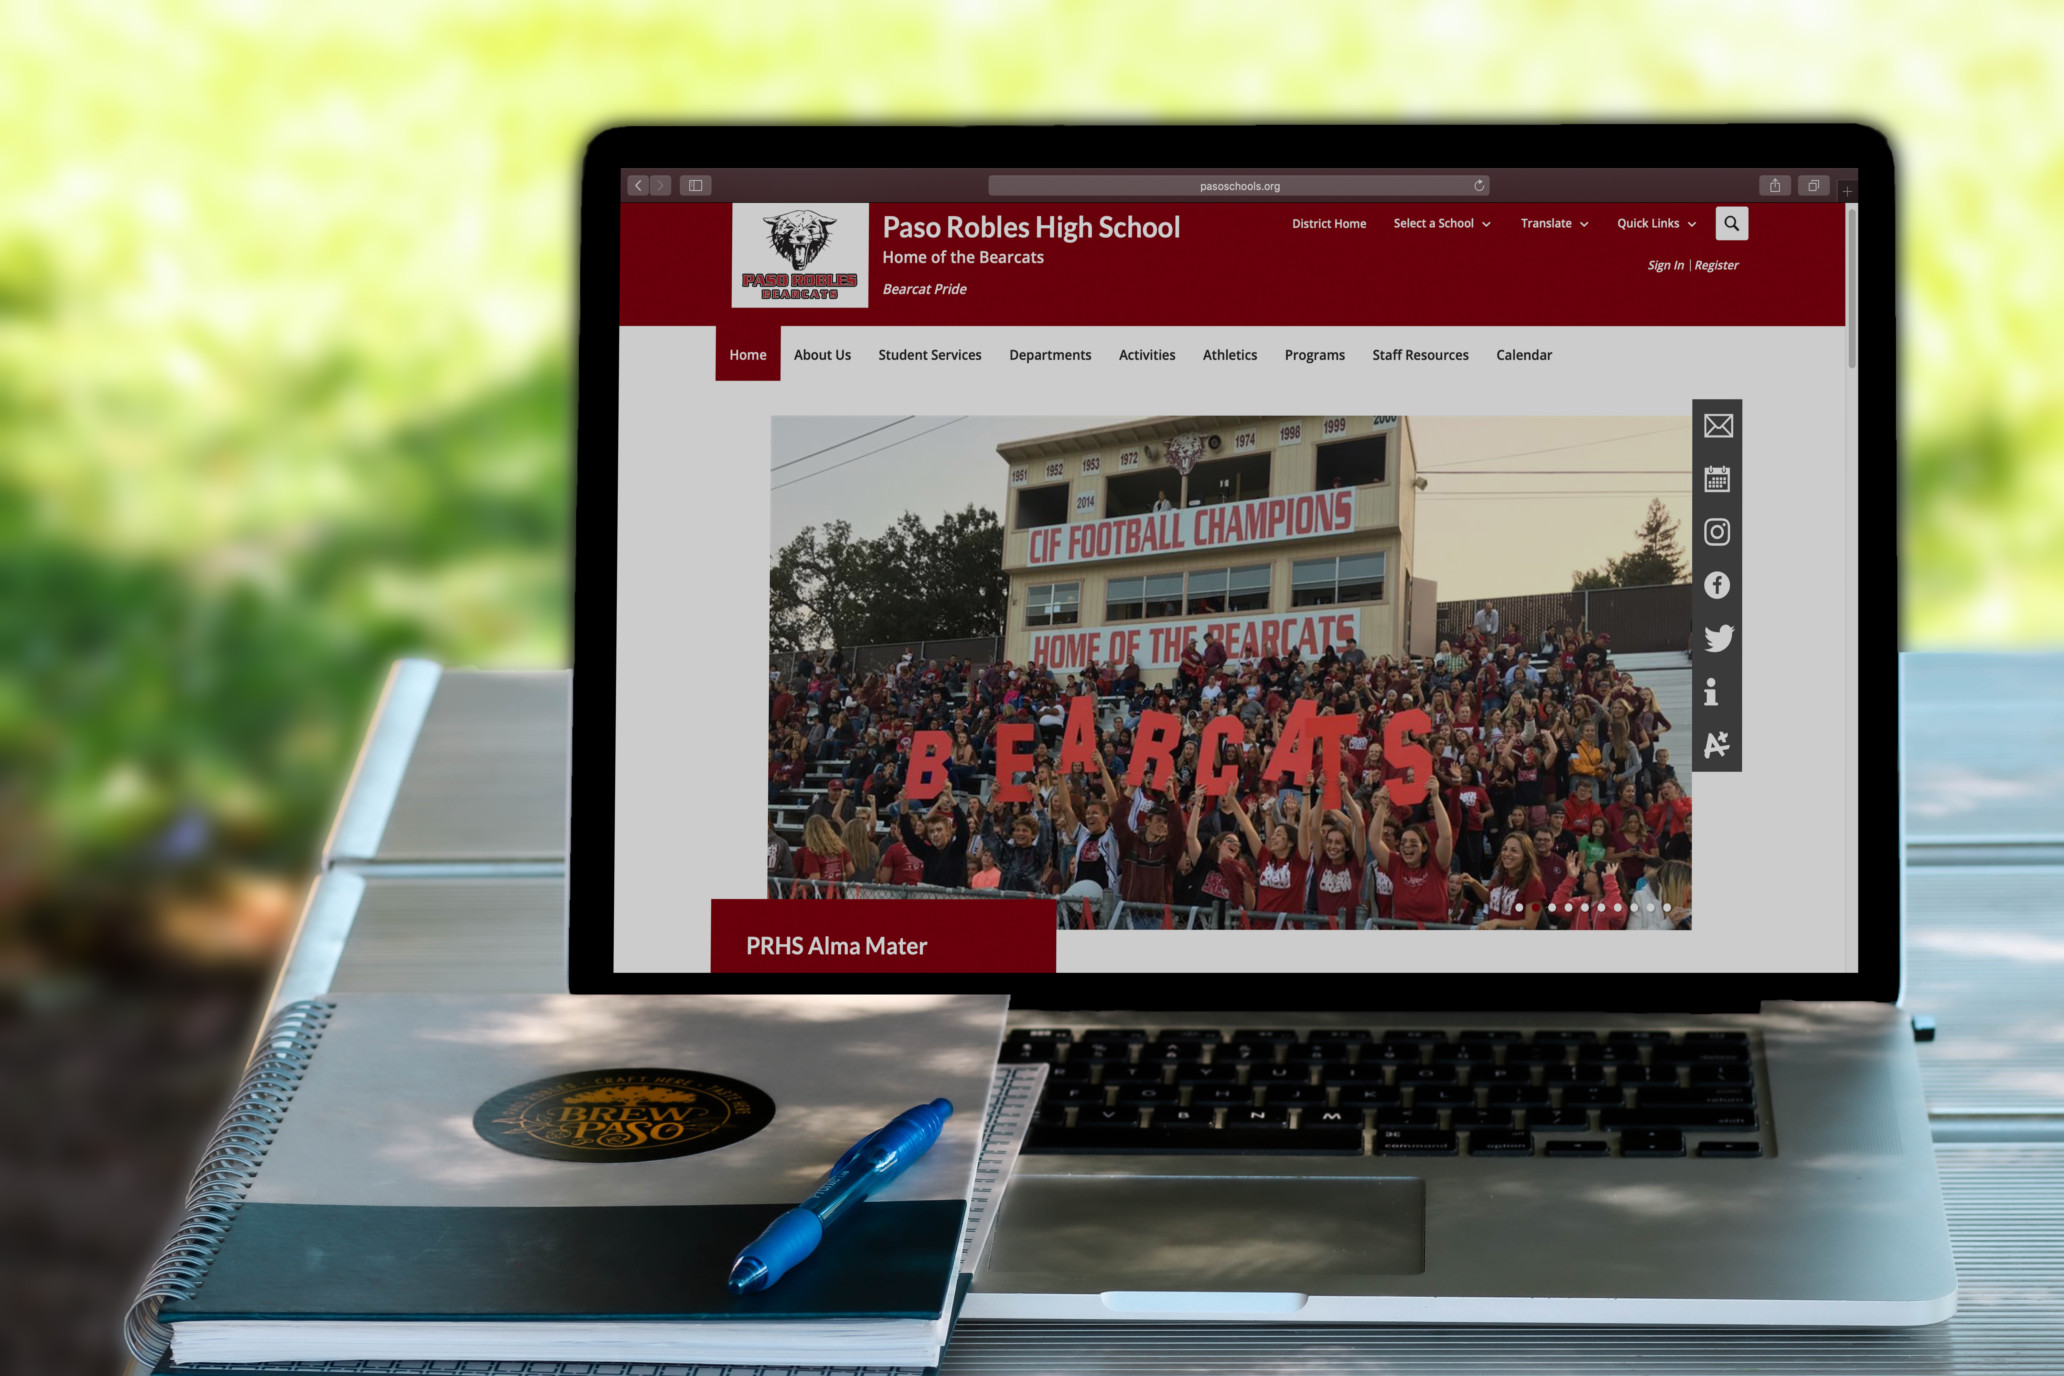 image of Paso Robles highschool website on laptop